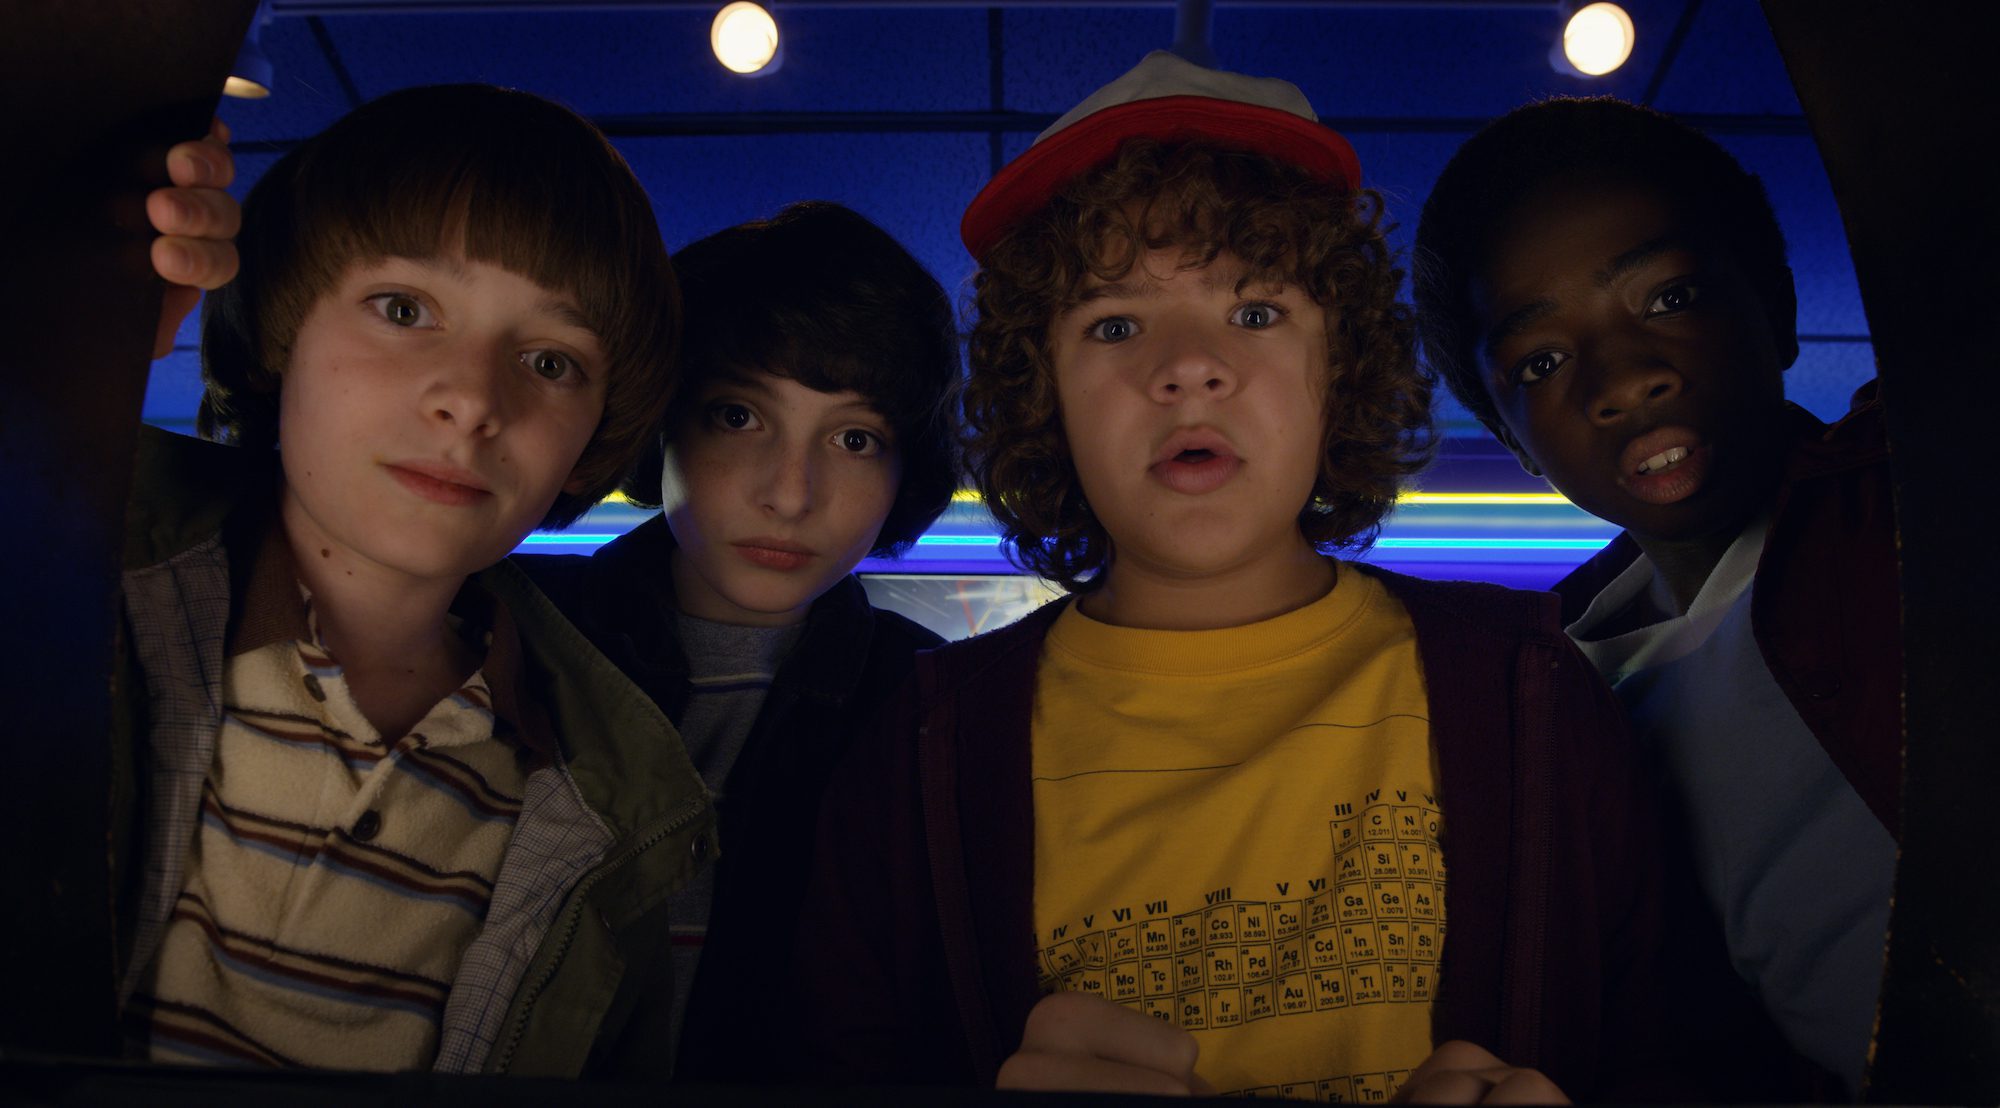 The party is together again in "Stranger Things 2". (Netflix)